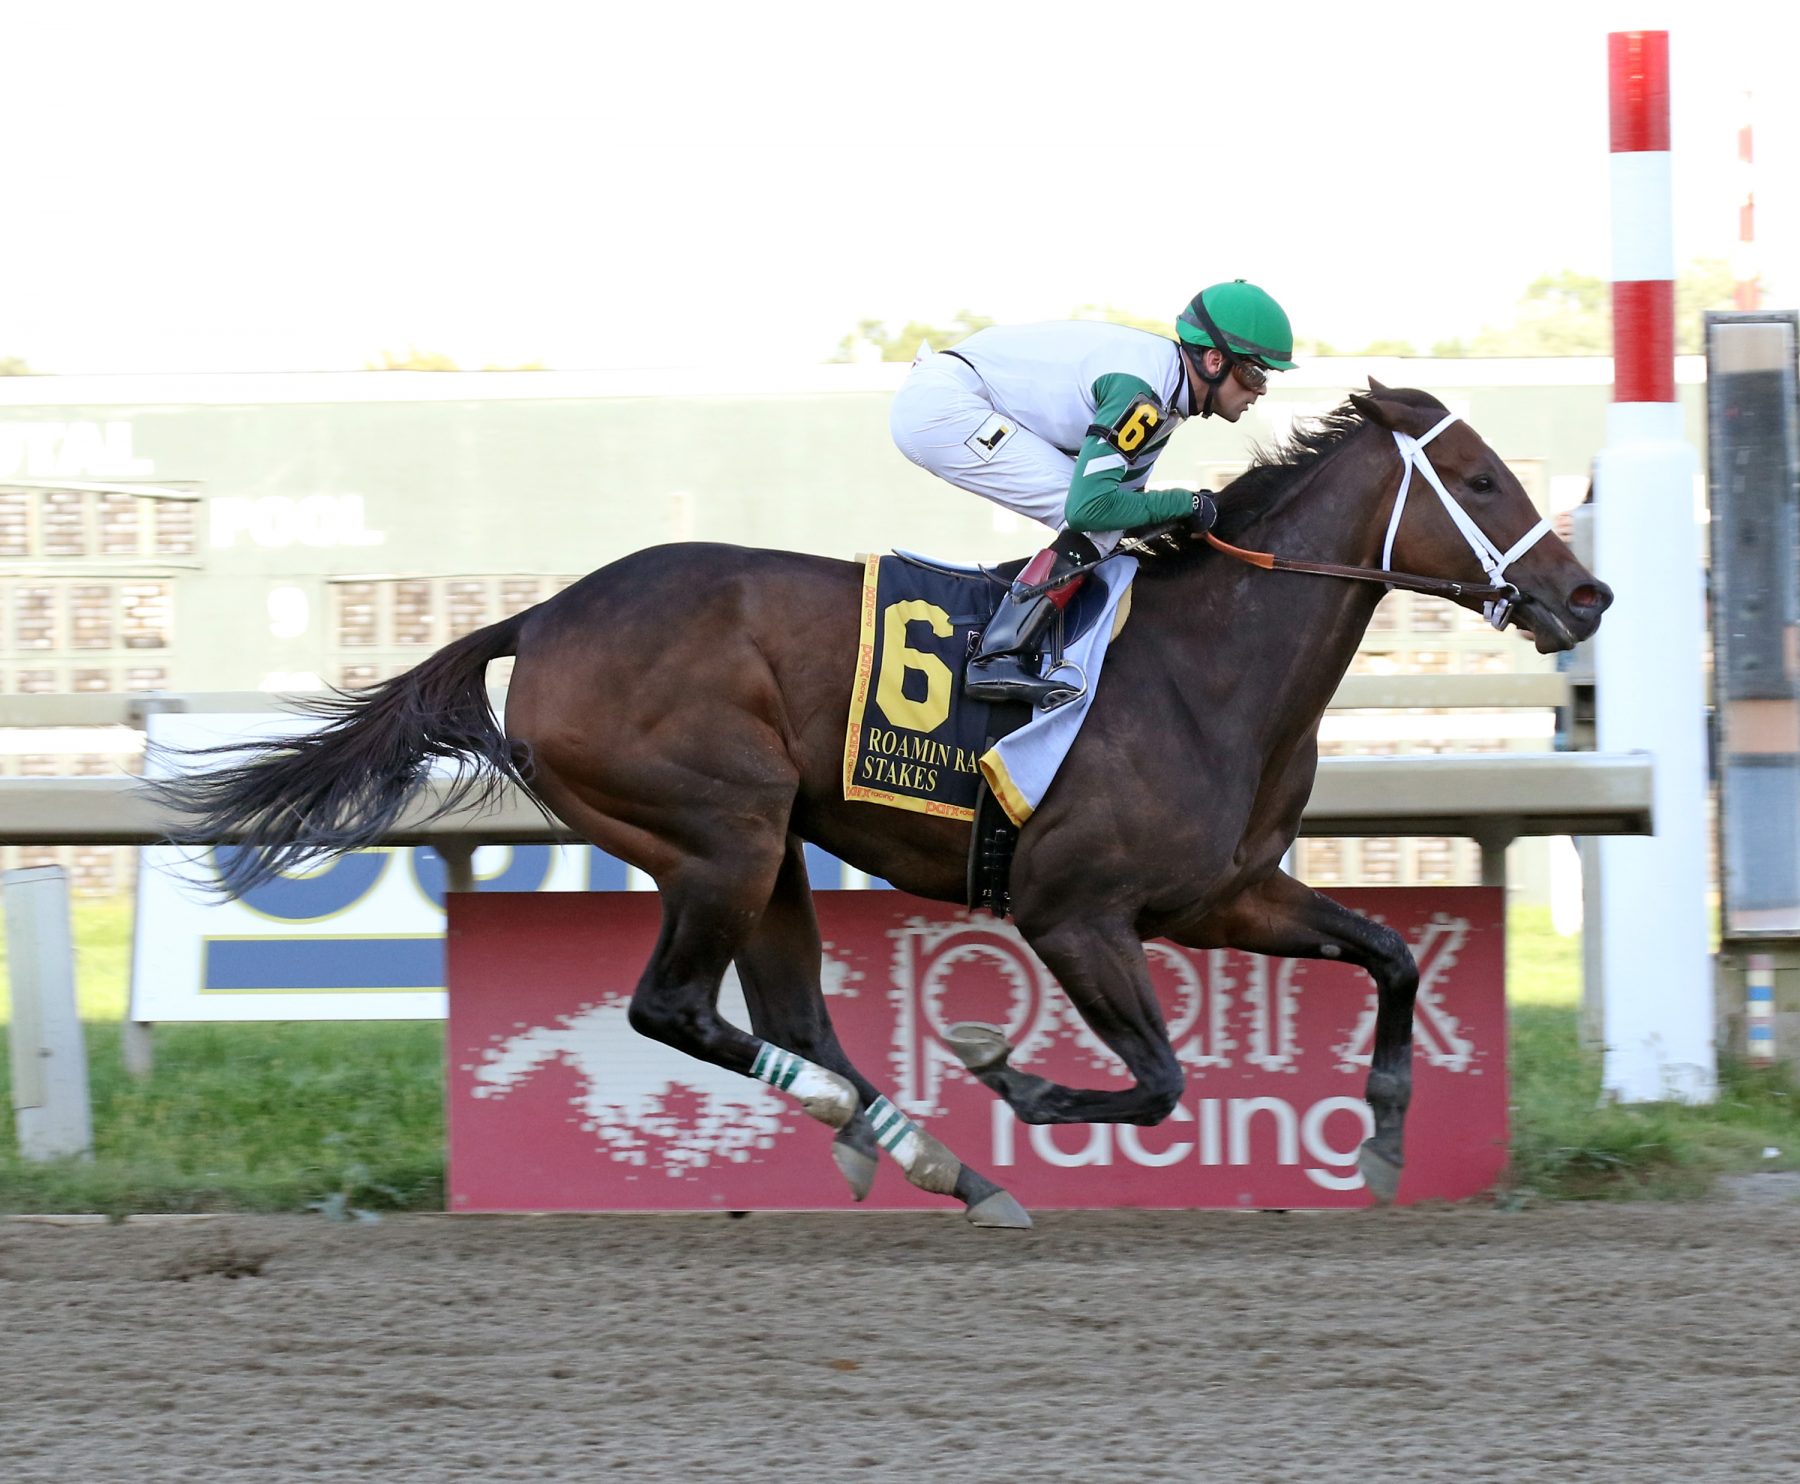 Chub Wagon #6 ridden by Jomar Torres wins the $100,000 Roamin Rachel Stakes at Parx Racing in Bensalem, PA. Photo by Barbara Weidl/EQUI-PHOTO.